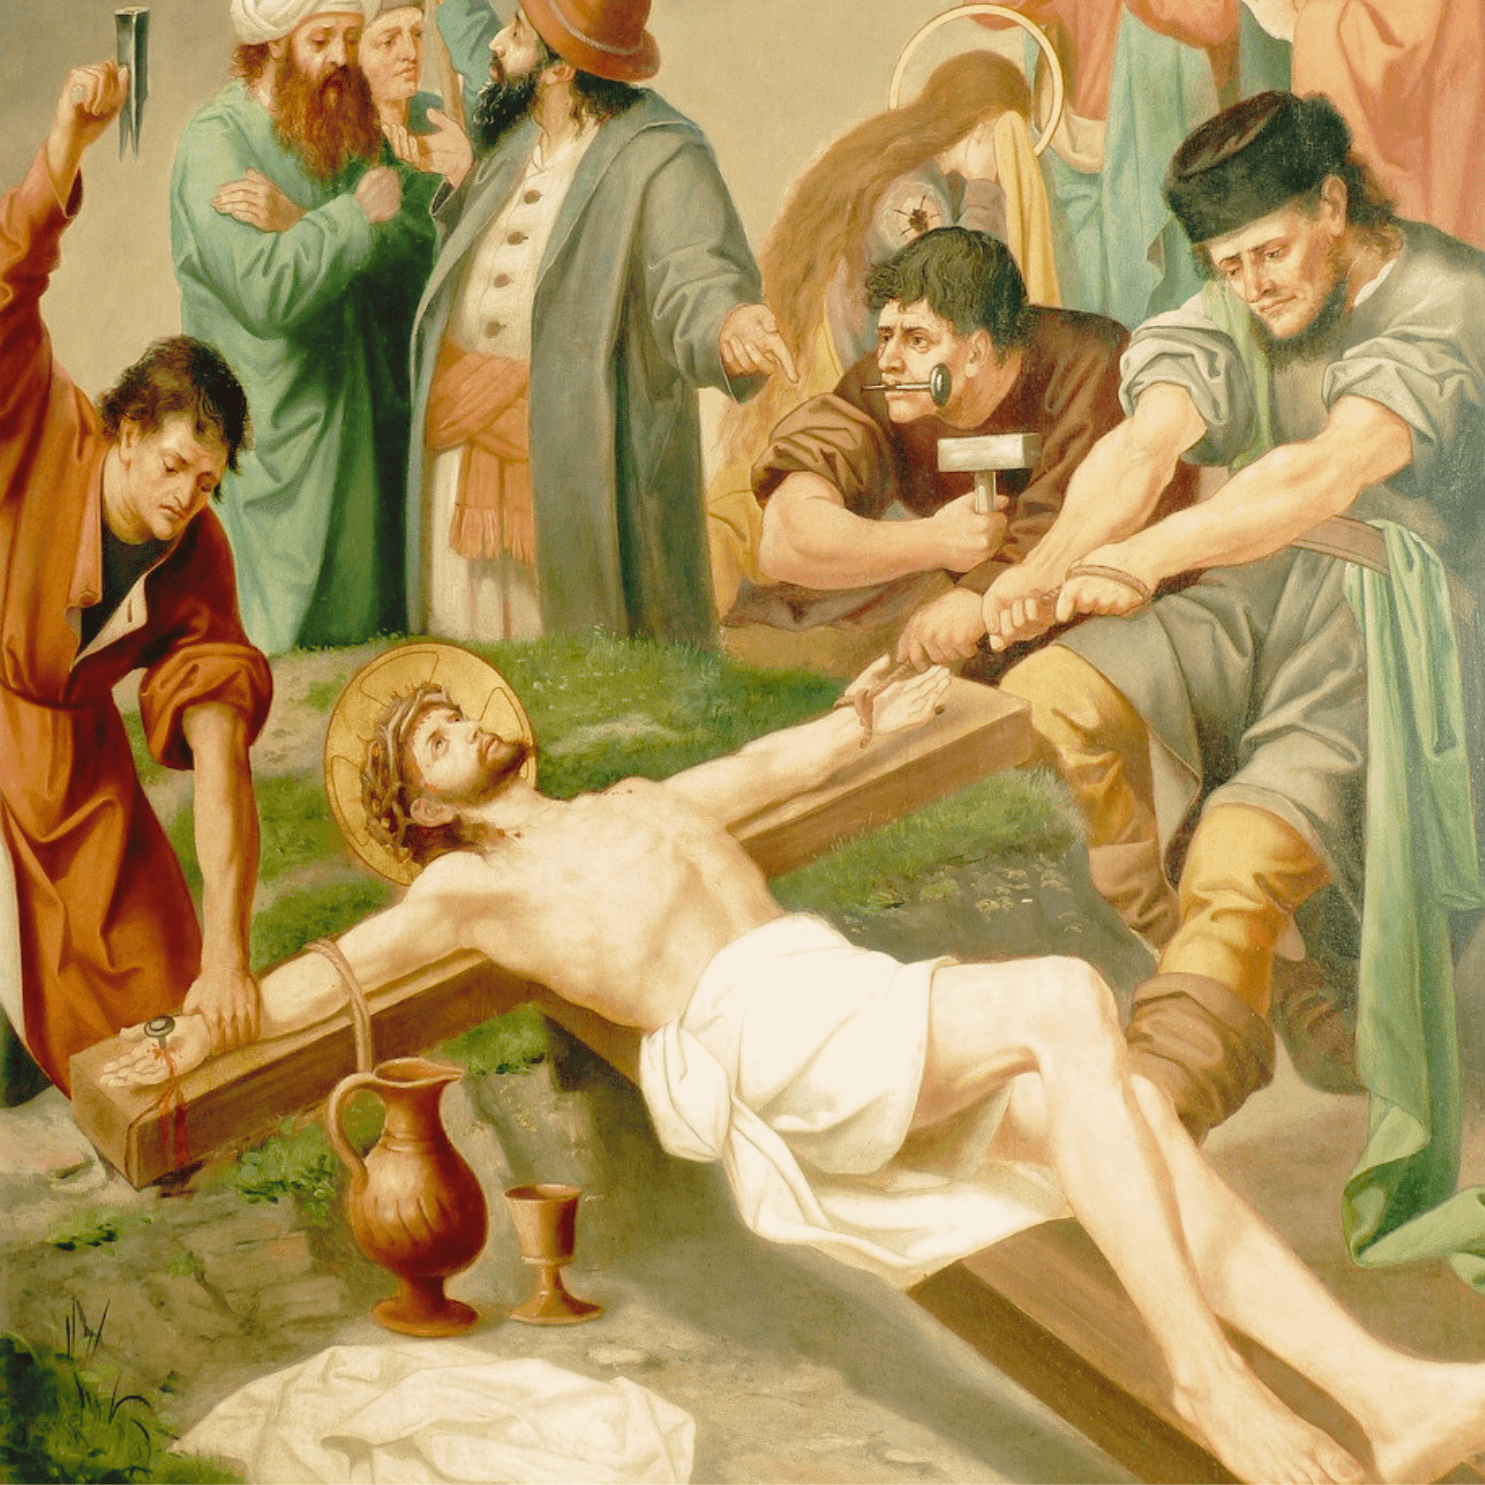 The Way of the Cross Eleventh Station: Jesus is Nailed to the Cross